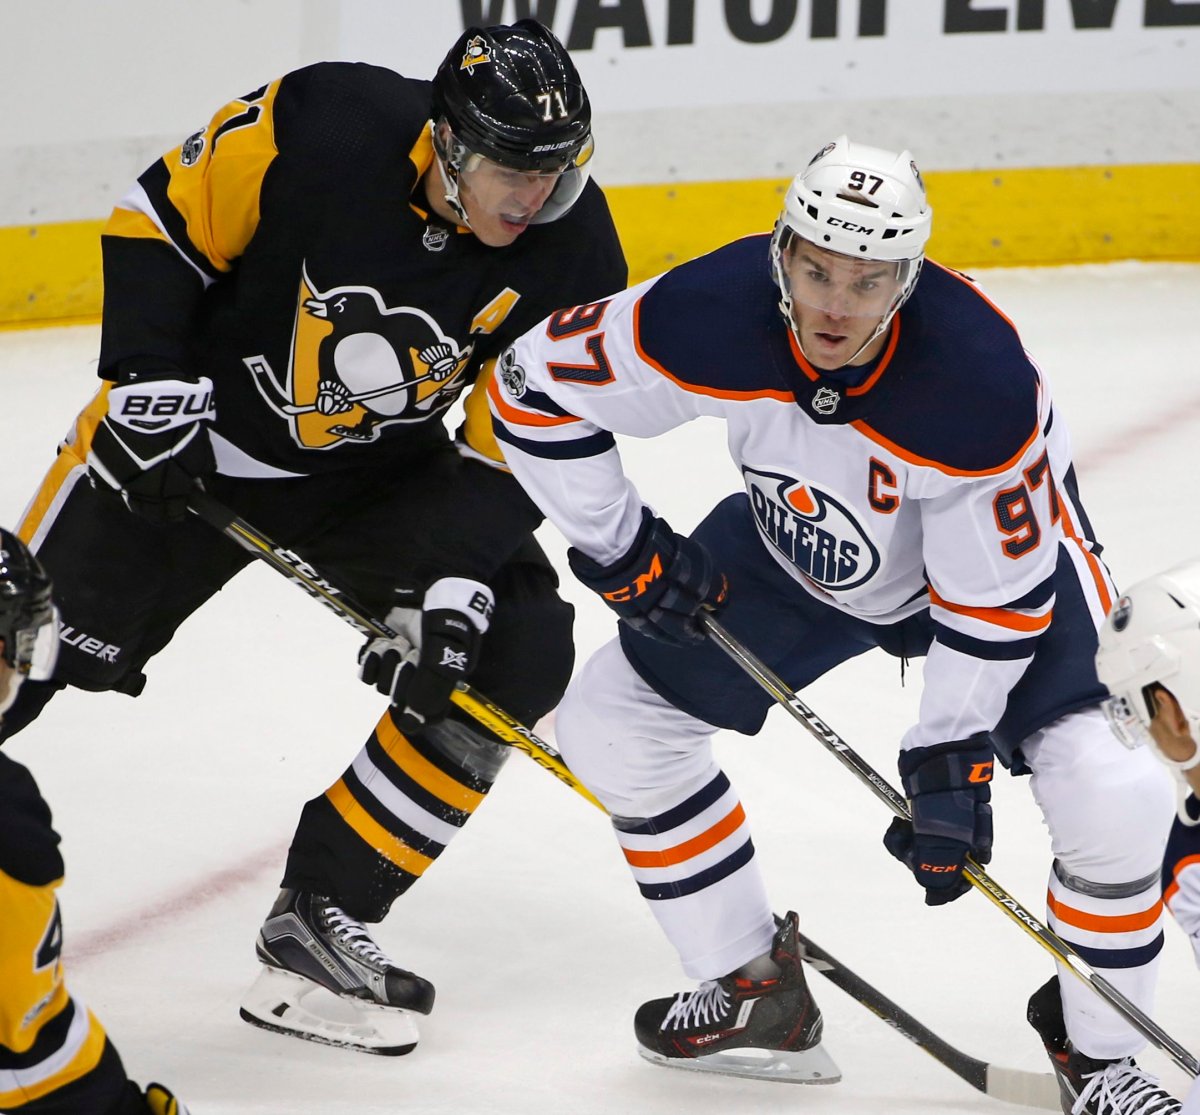 Pittsburgh Penguins' Evgeni Malkin (71) works for position against Edmonton Oilers' Connor McDavid (97) in the first period of an NHL hockey game in Pittsburgh, Tuesday, Oct. 24, 2017. (AP Photo/Gene J. Puskar).